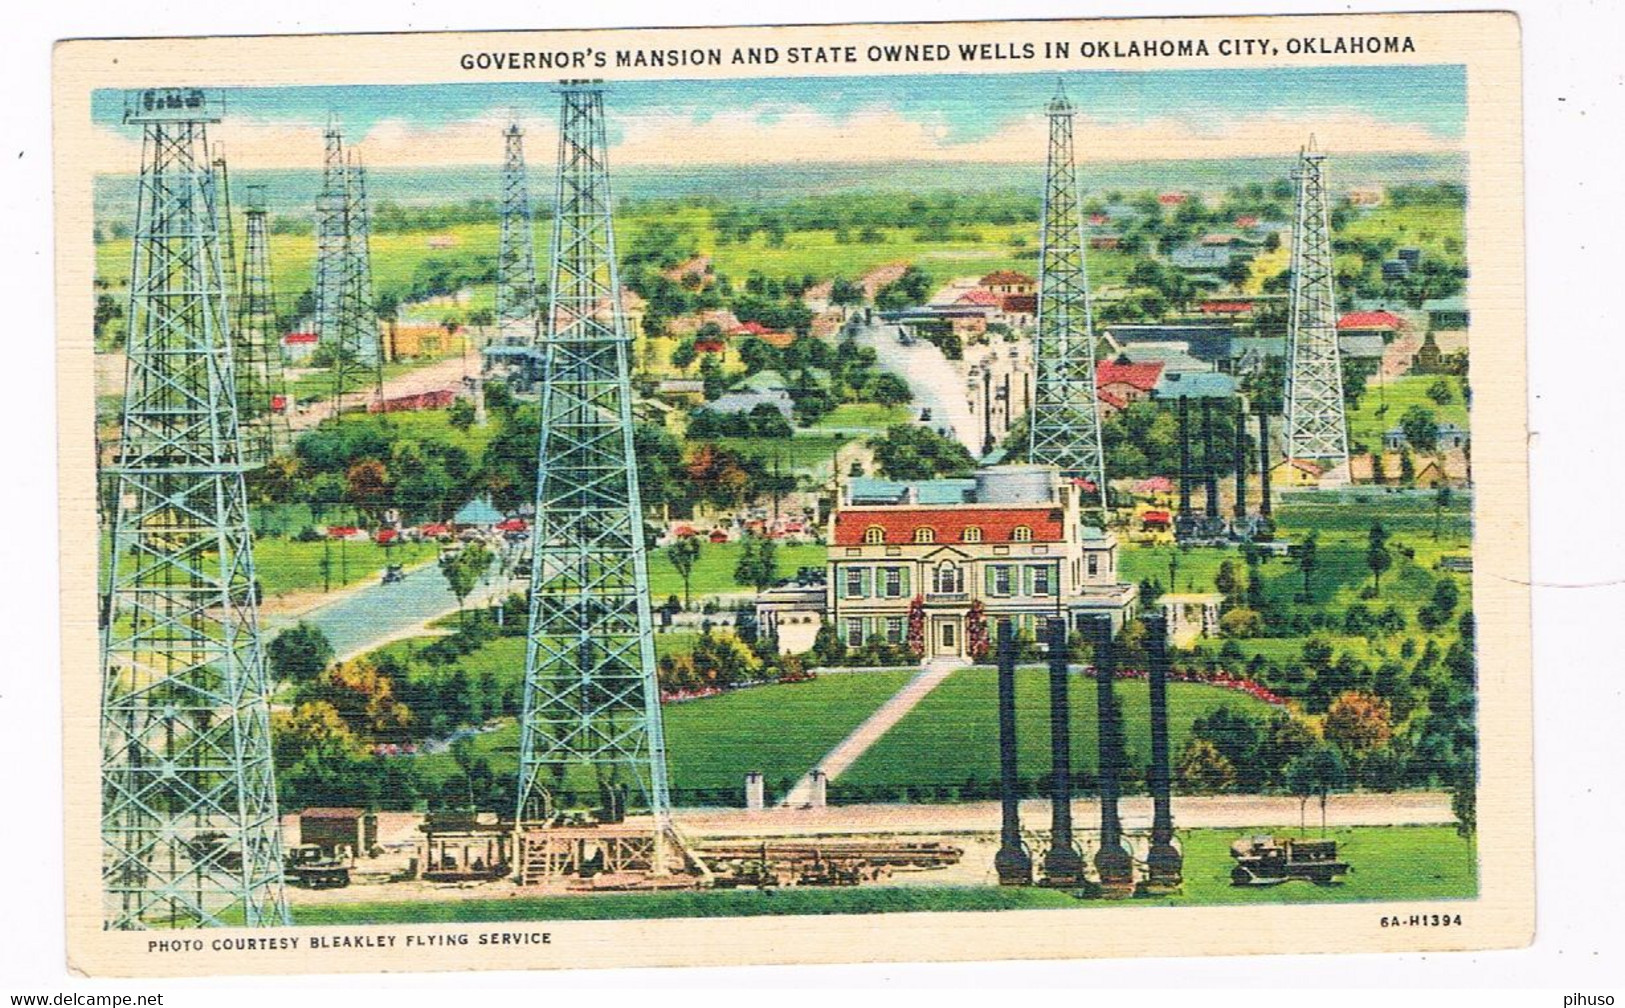 AM-39   OKLAHOMA CITY : Governor's Mansion And State Owned Wells - Oklahoma City